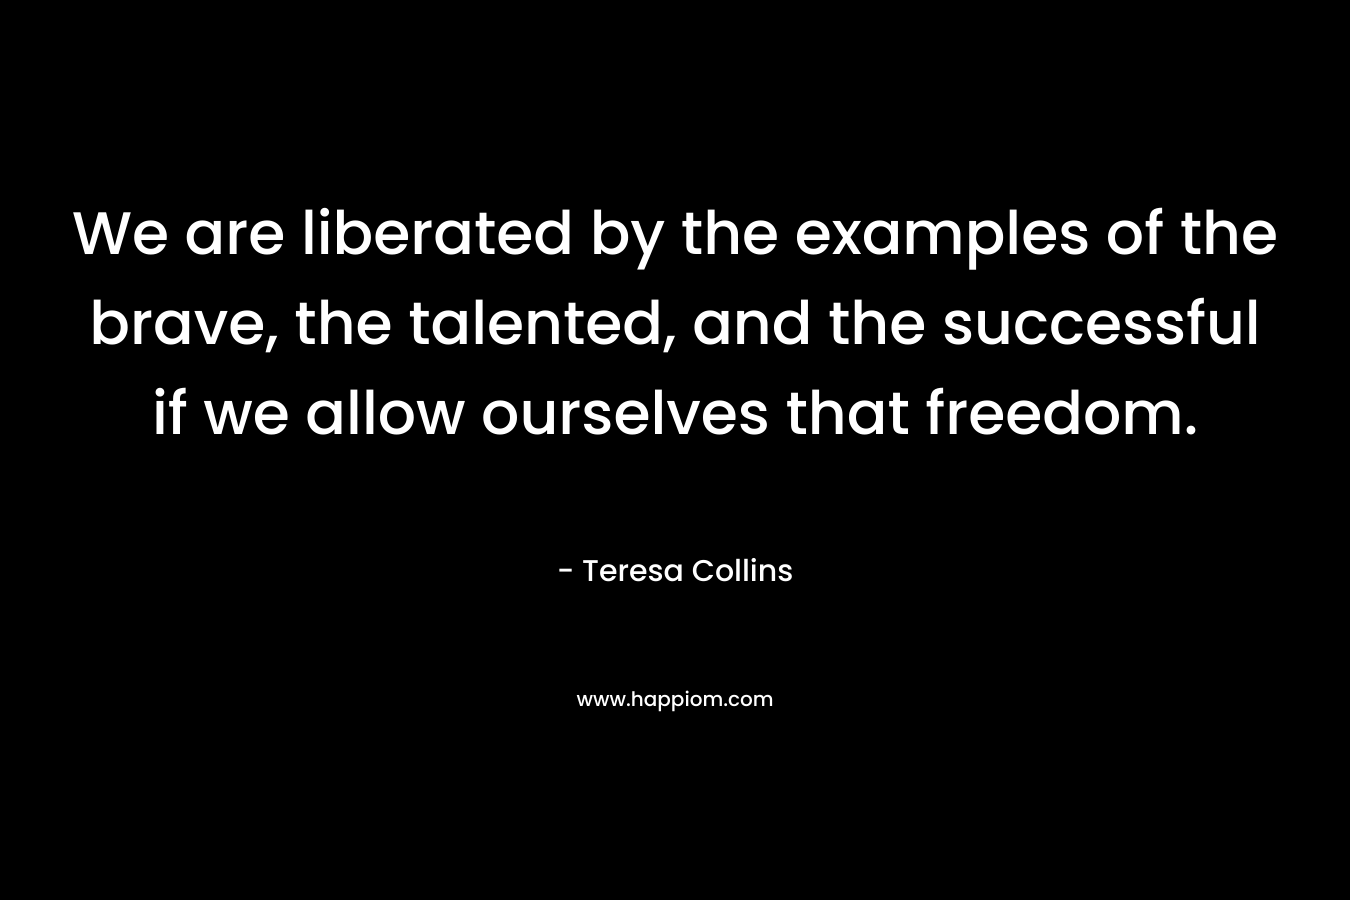 We are liberated by the examples of the brave, the talented, and the successful if we allow ourselves that freedom.